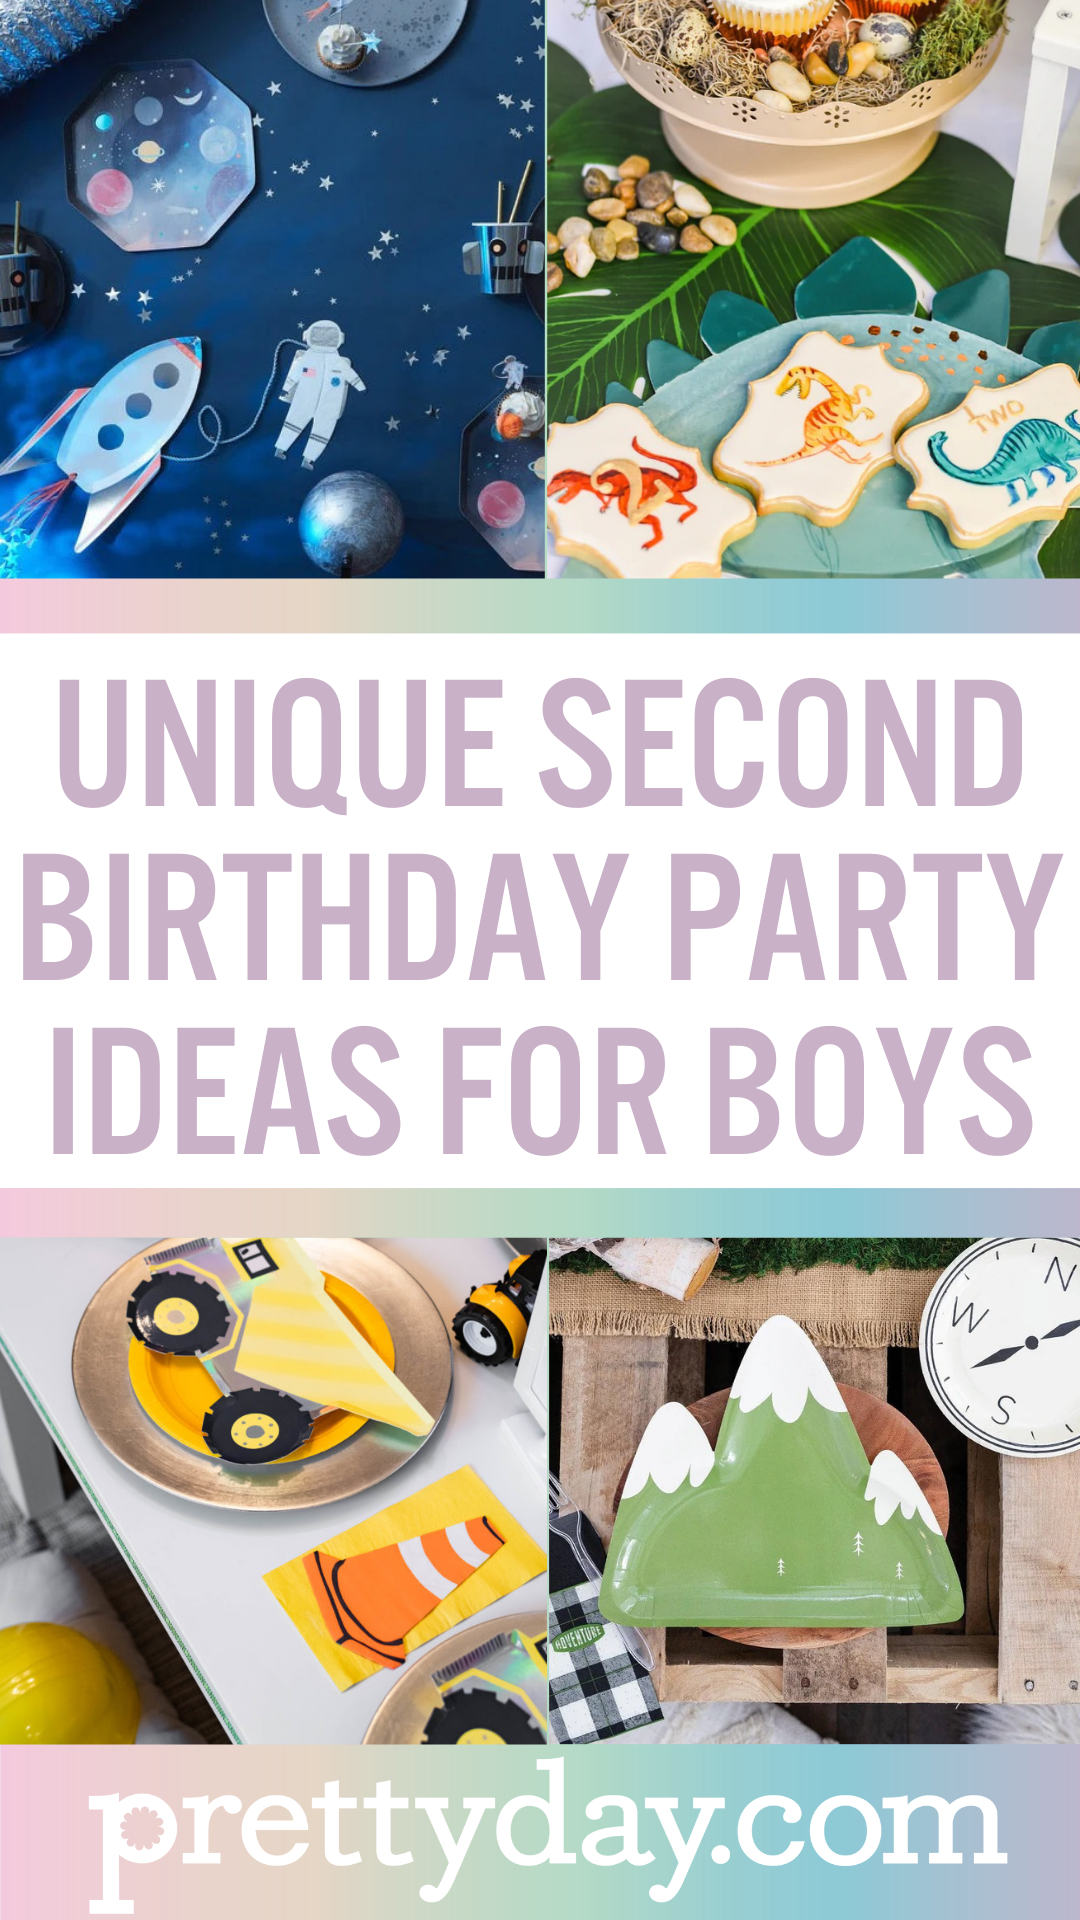 8 UNIQUE SECOND BIRTHDAY THEMES FOR BOYS!